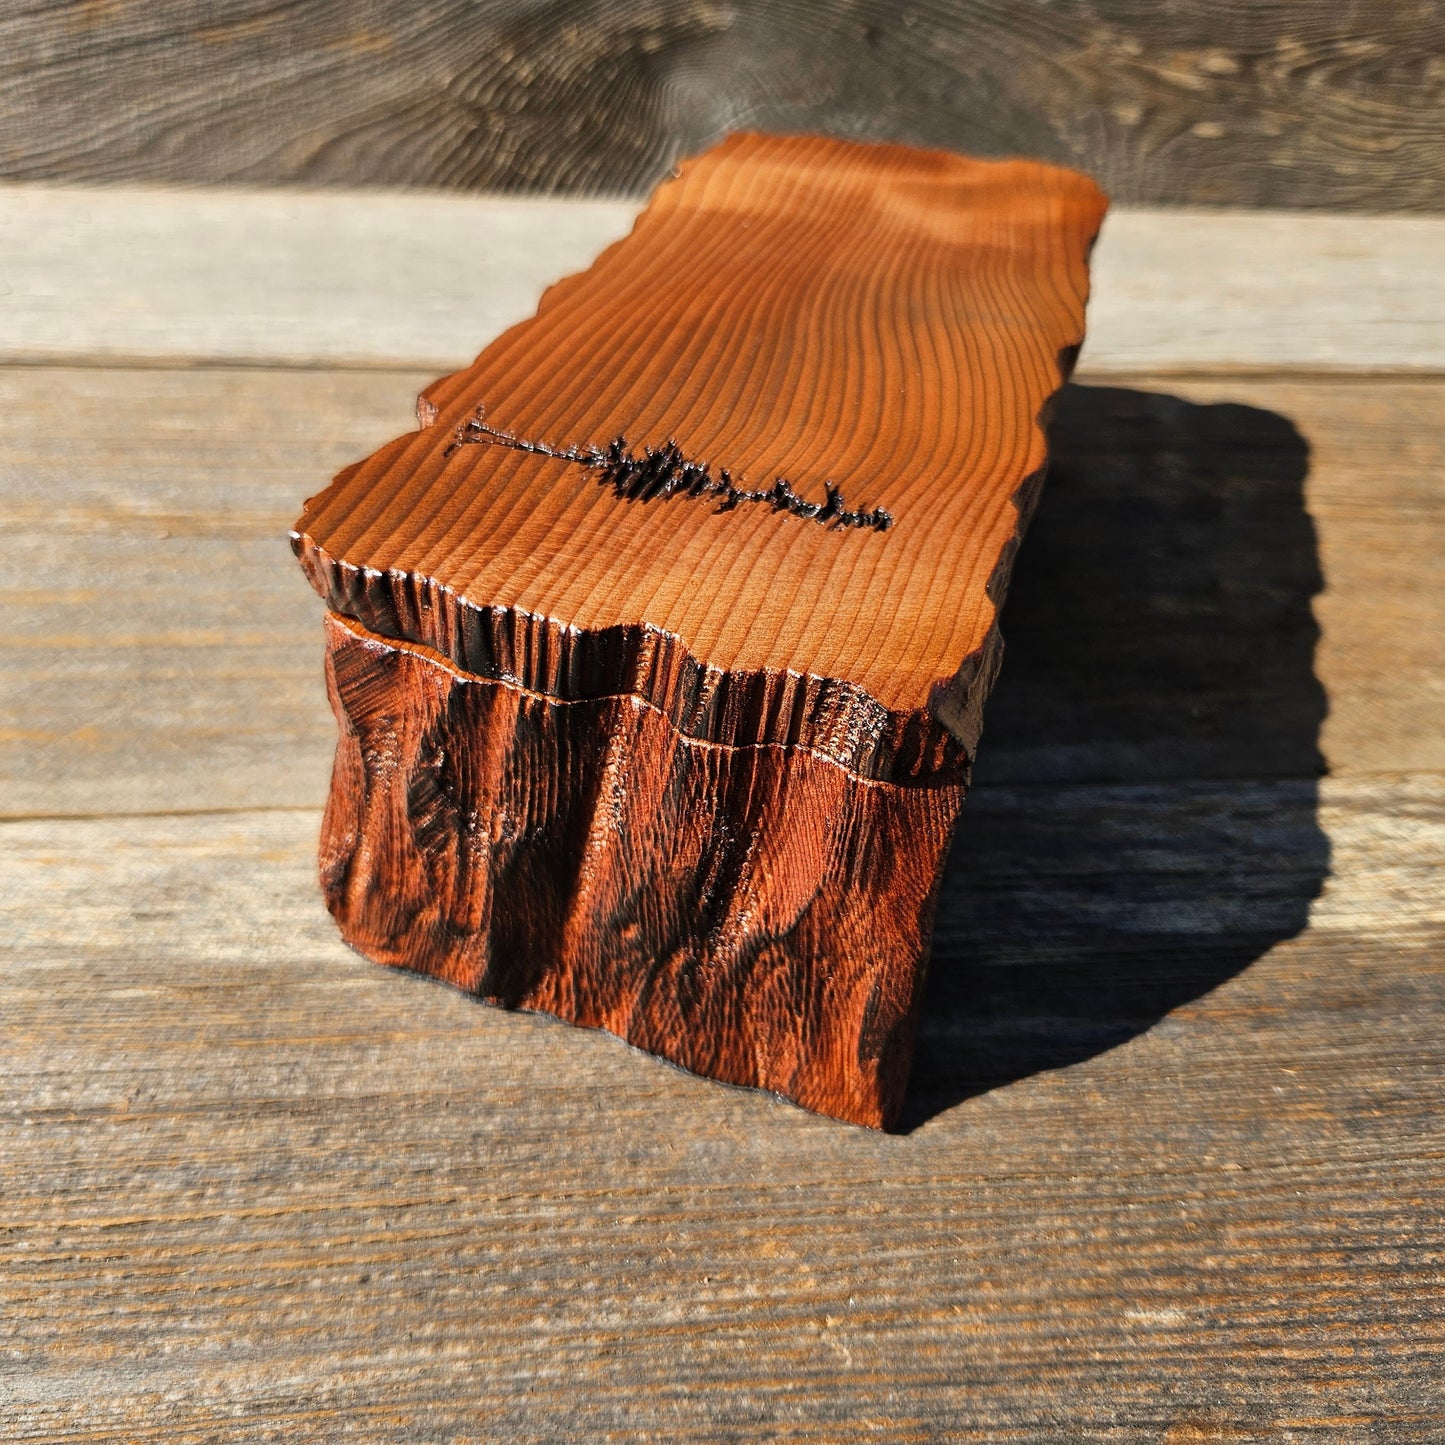 Wood Valet Box Curly Redwood Tree Engraved Rustic Handmade CA Storage #603 Handcrafted Christmas Gift Engagement Gift for Men Jewelry